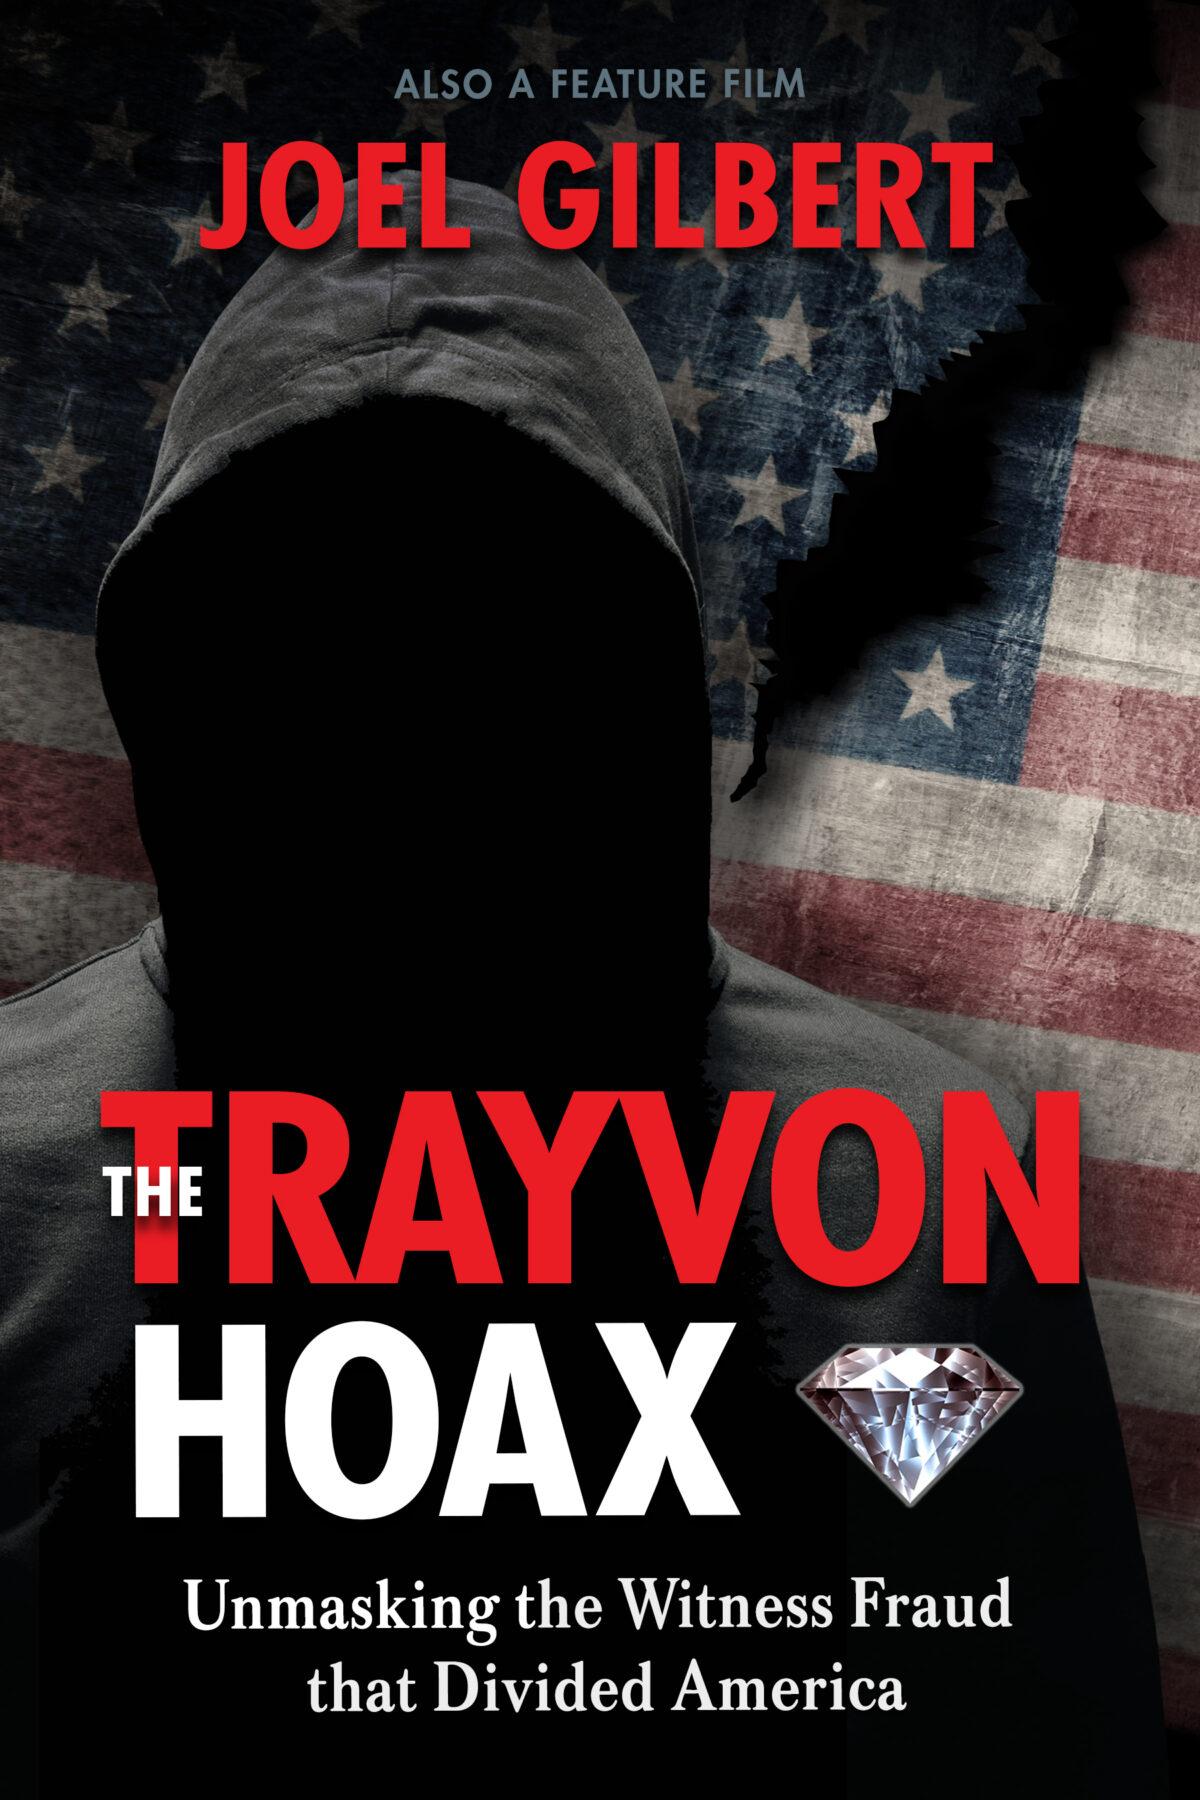 The cover of the book "The Trayvon Hoax: Unmasking the Witness Fraud That Divides America." (Trayvonhoax.com)